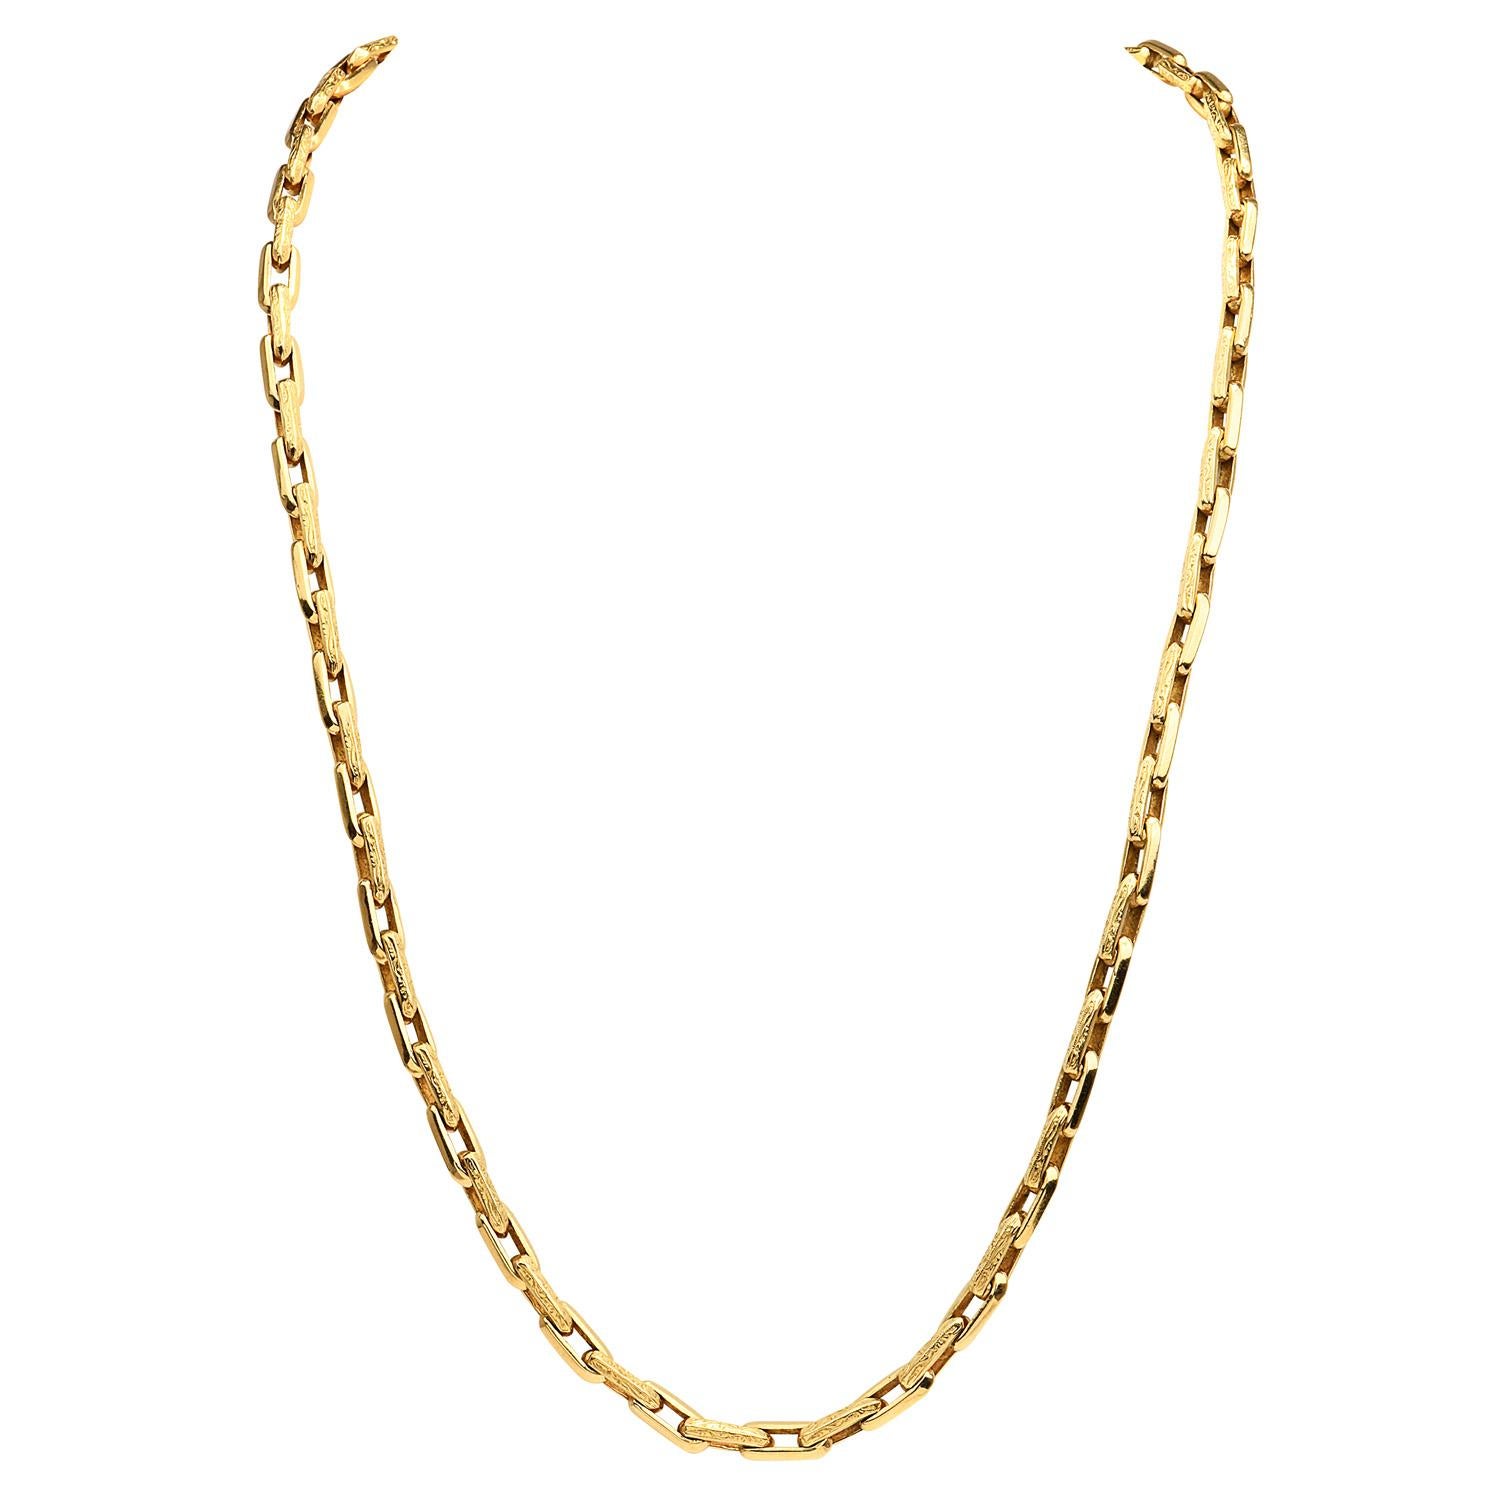 Rare Heavy 1970's Italian link chain necklace, with a textured hand engraving. 

It is crafted in solid 18K yellow gold and 32 inches long, this elegant necklace weighs 110.6 grams and the total length is approximately 34